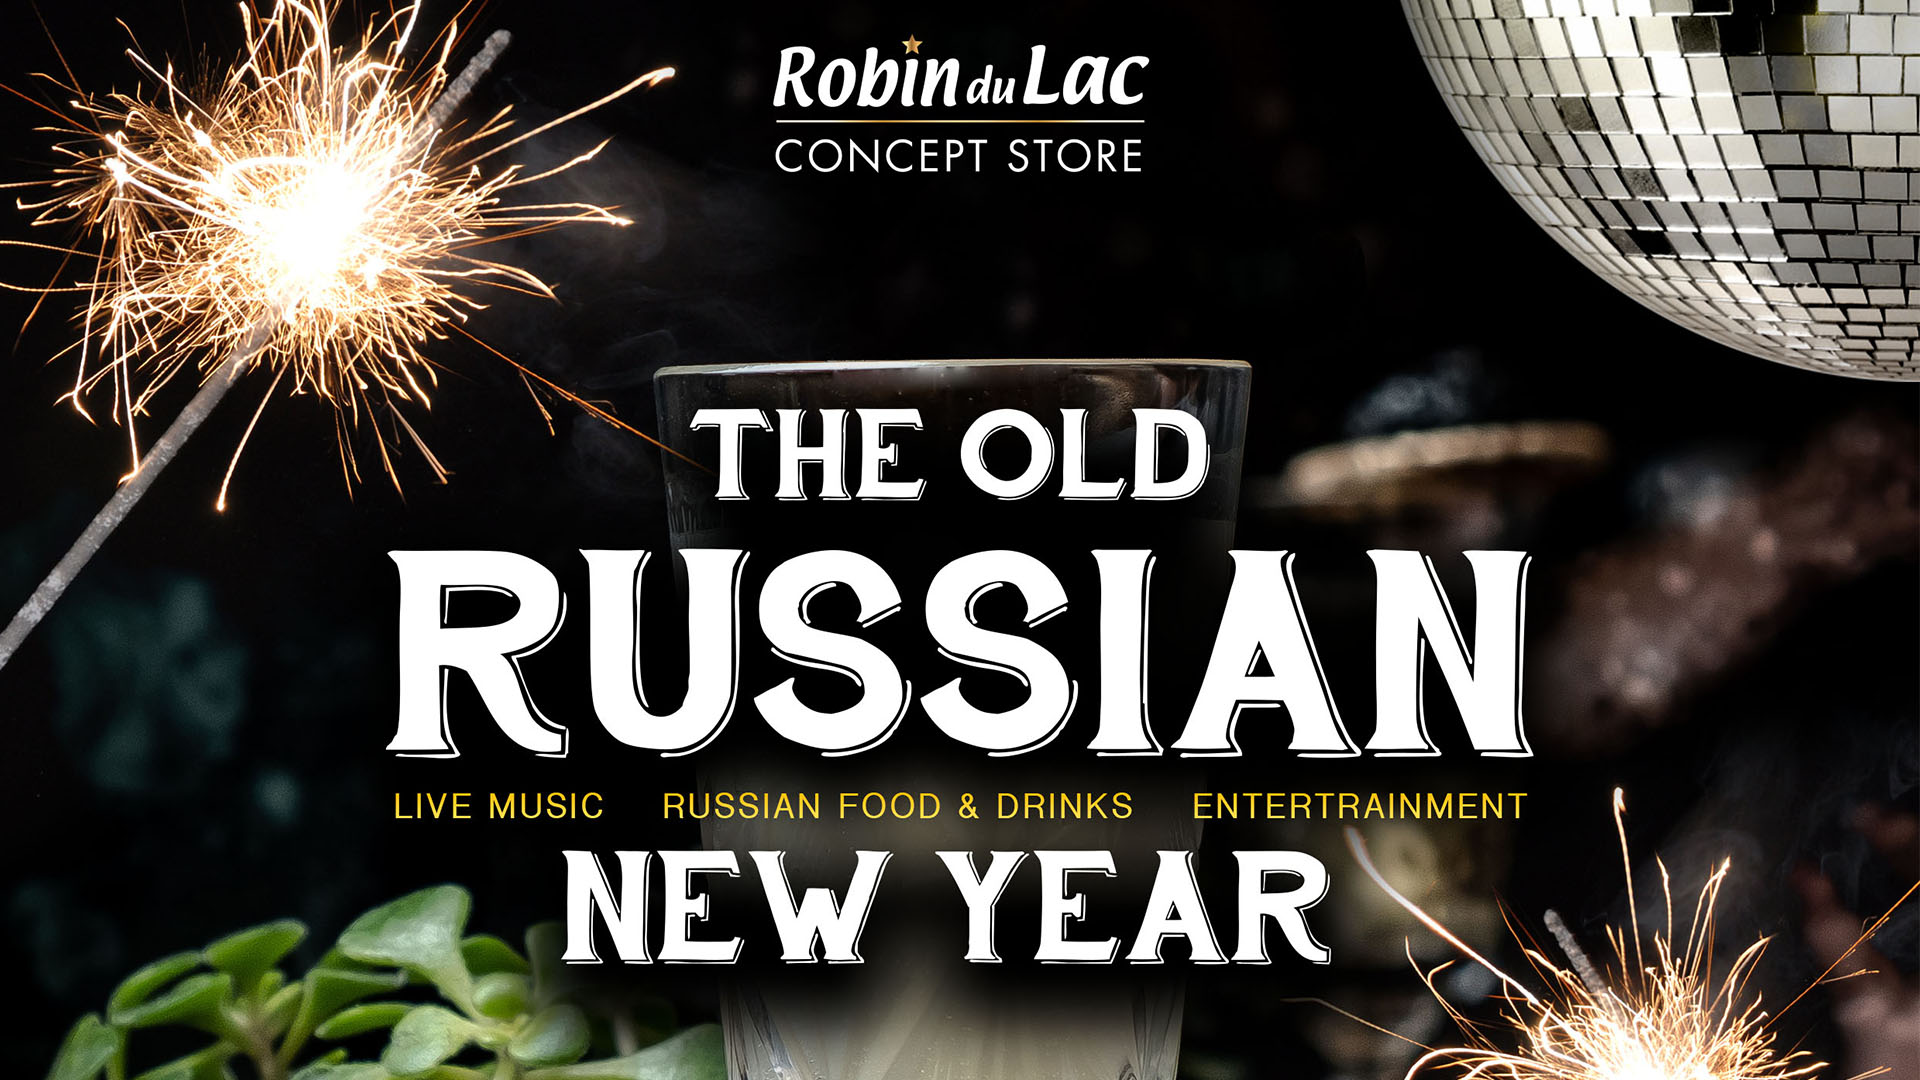 THE OLD RUSSIAN NEW YEAR